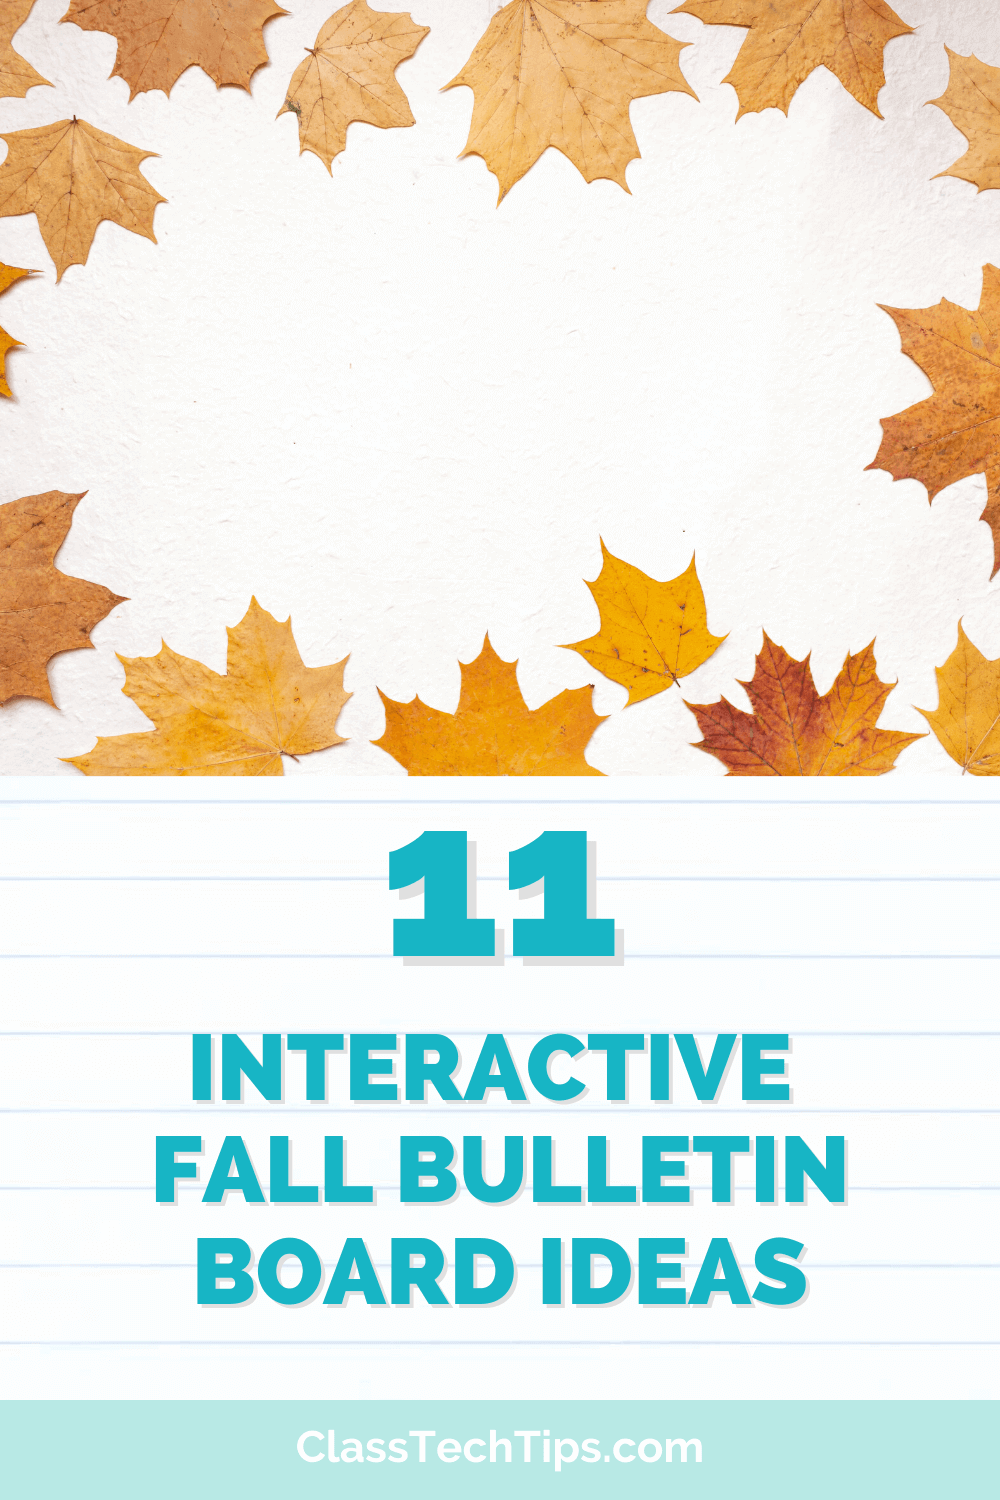 A colorful array of autumn leaves framing the title text for a blog post about 11 Interactive Fall Bulletin Board Ideas.